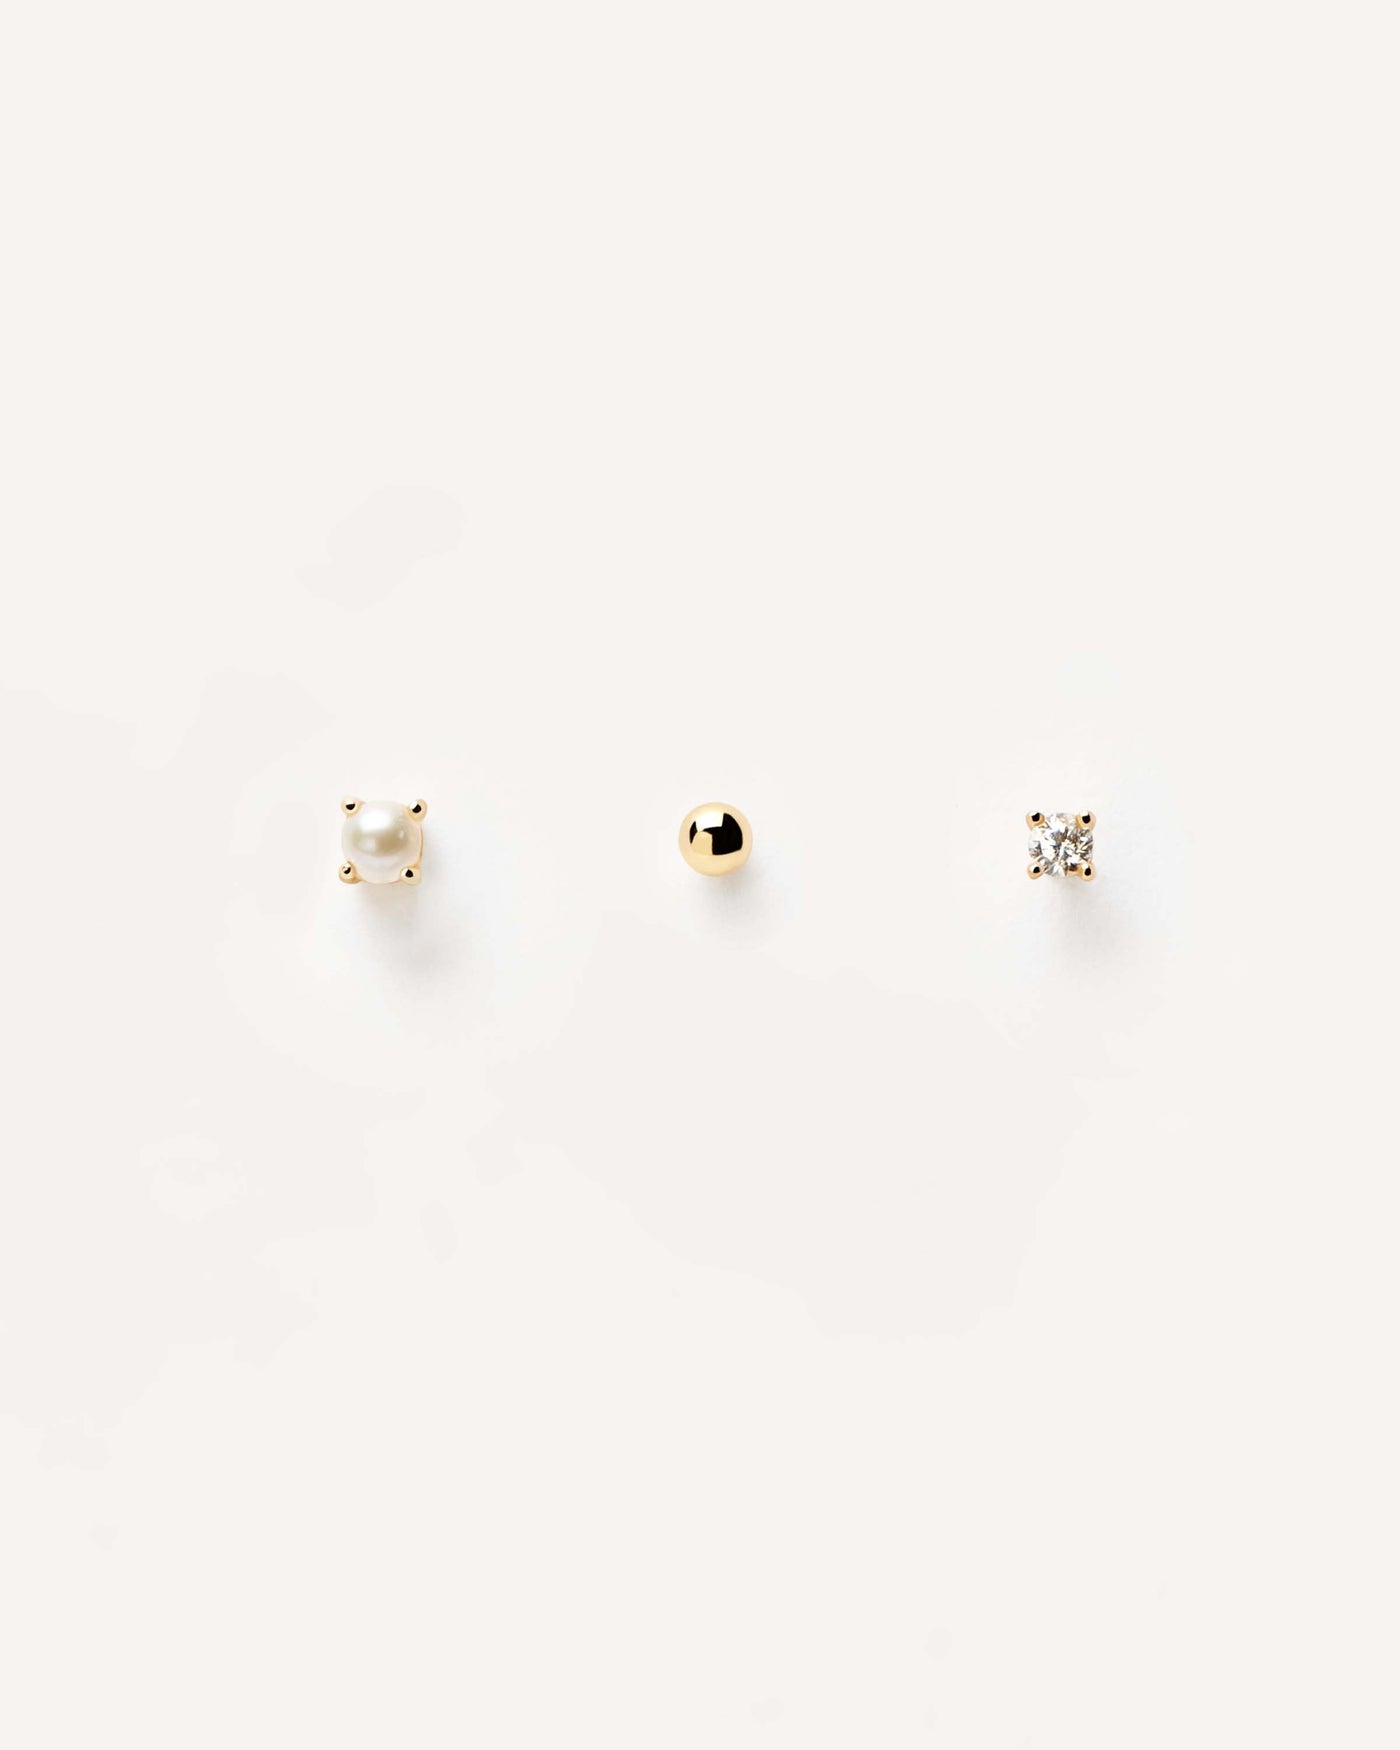 2023 Selection | Angel Earrings Set. Set of 3 dainty gold-plated studs in one. Get the latest arrival from PDPAOLA. Place your order safely and get this Best Seller. Free Shipping.